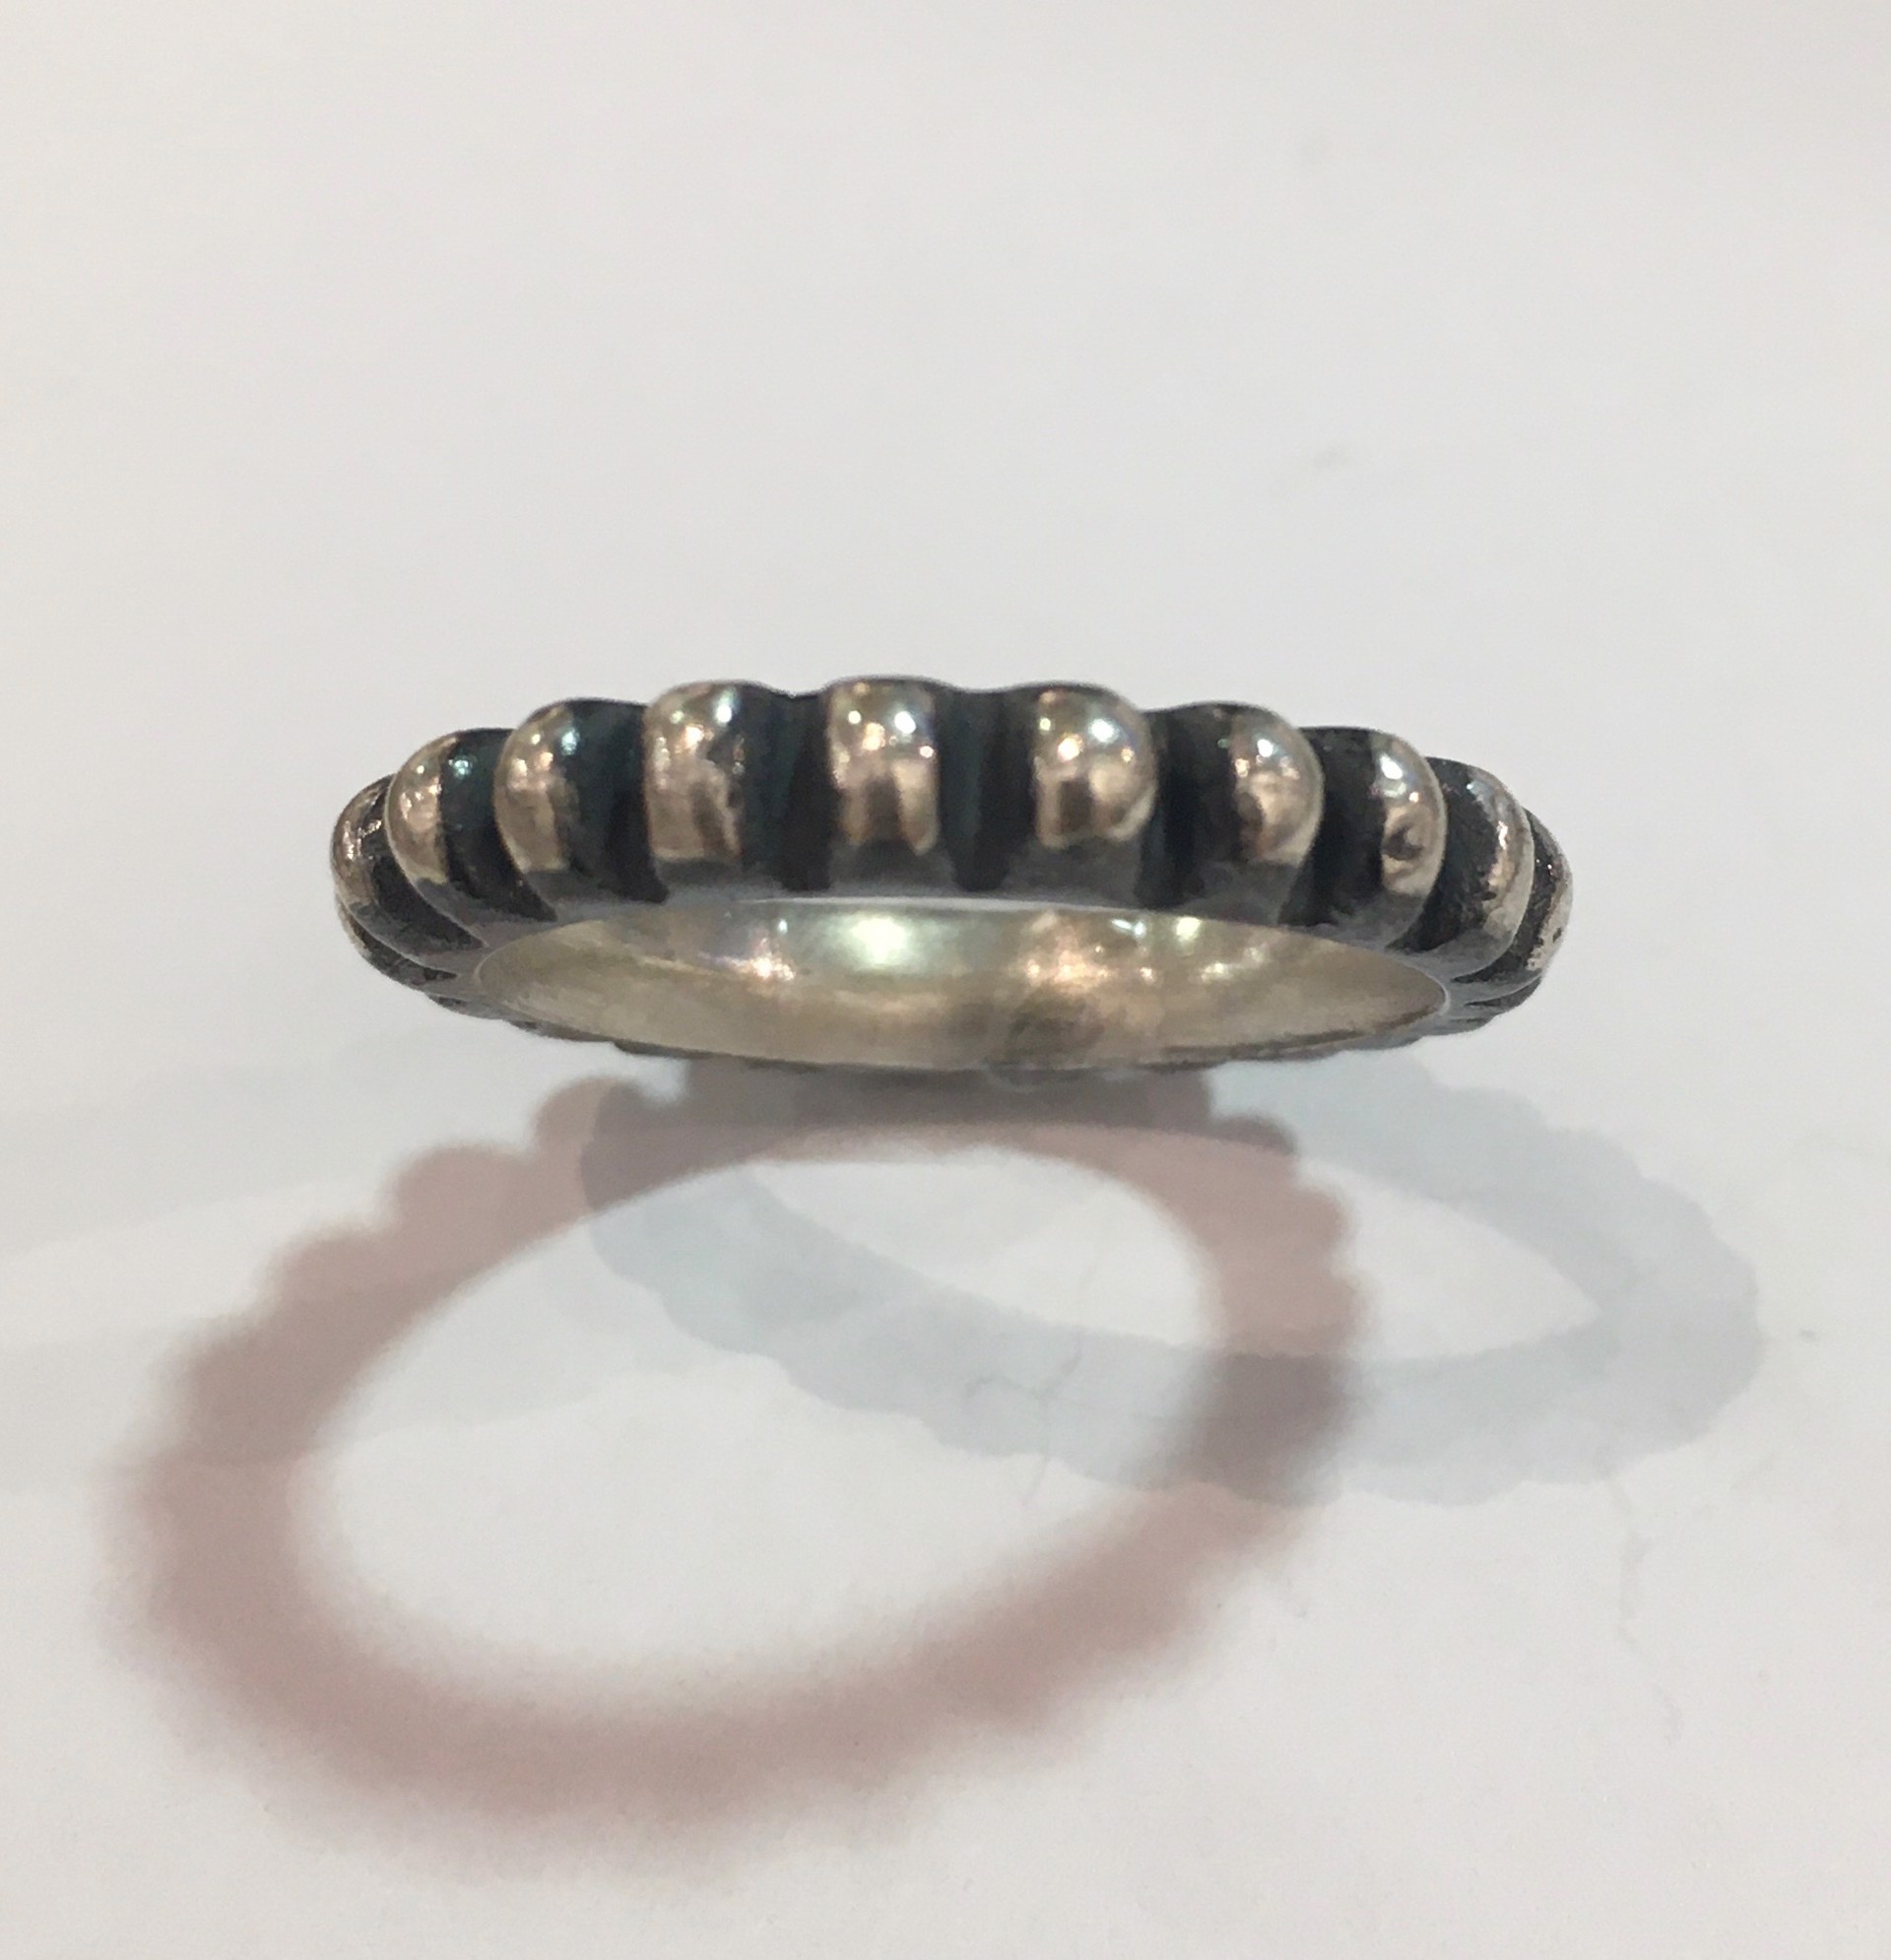 Oxidized Silver Ring by DAHLIA KANNER